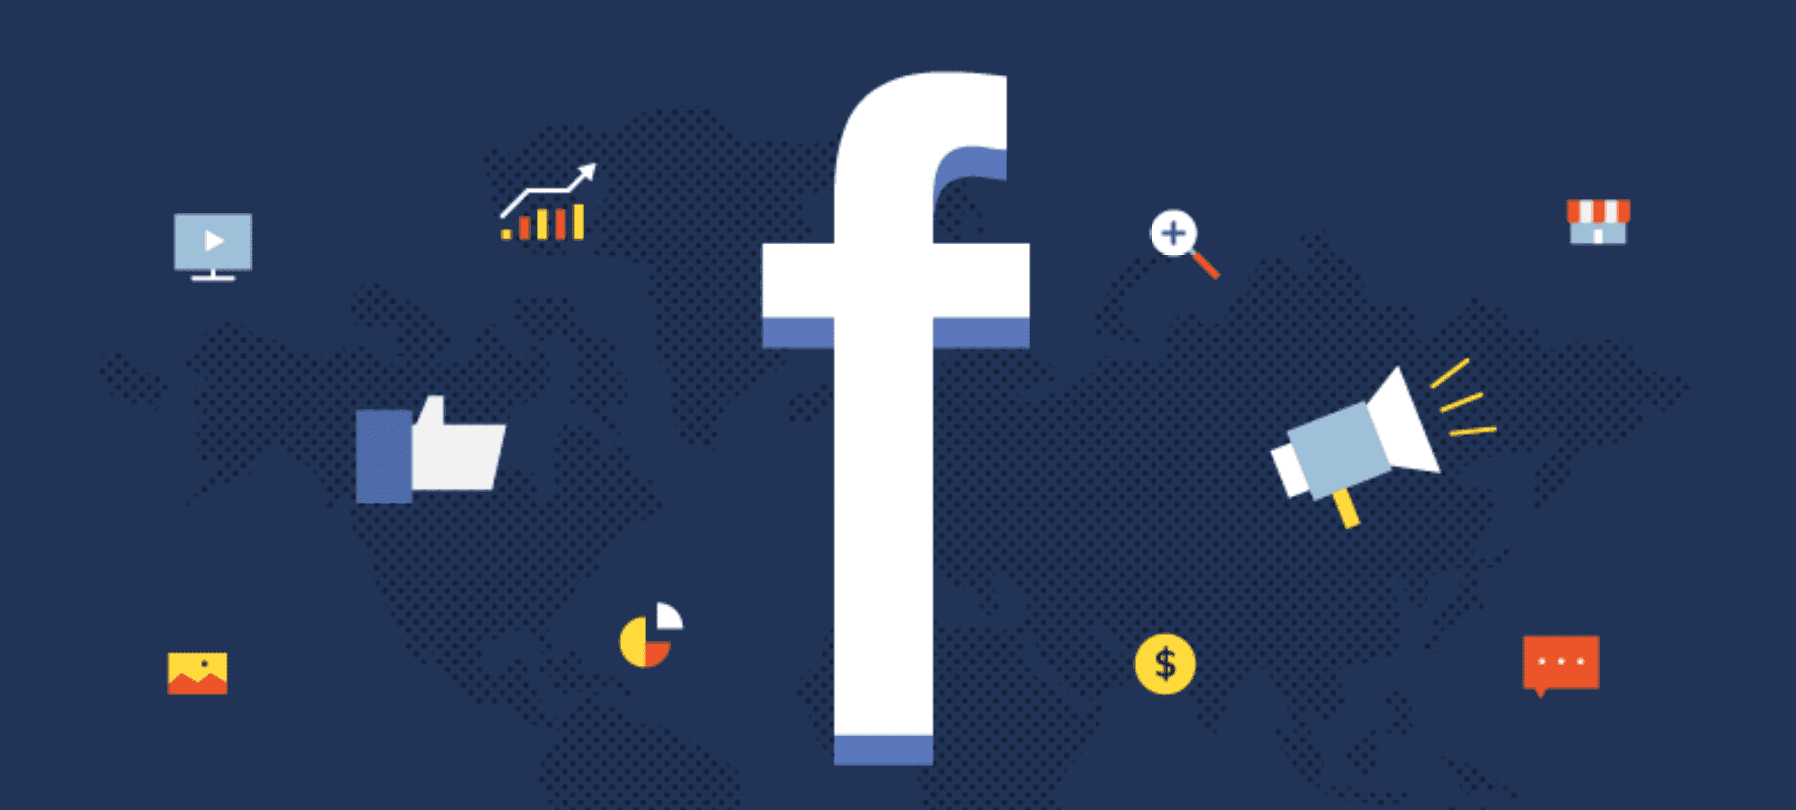 Facebook symbol on blue background surrounded by various marketing and communications icons; graphic courtesy of the author.